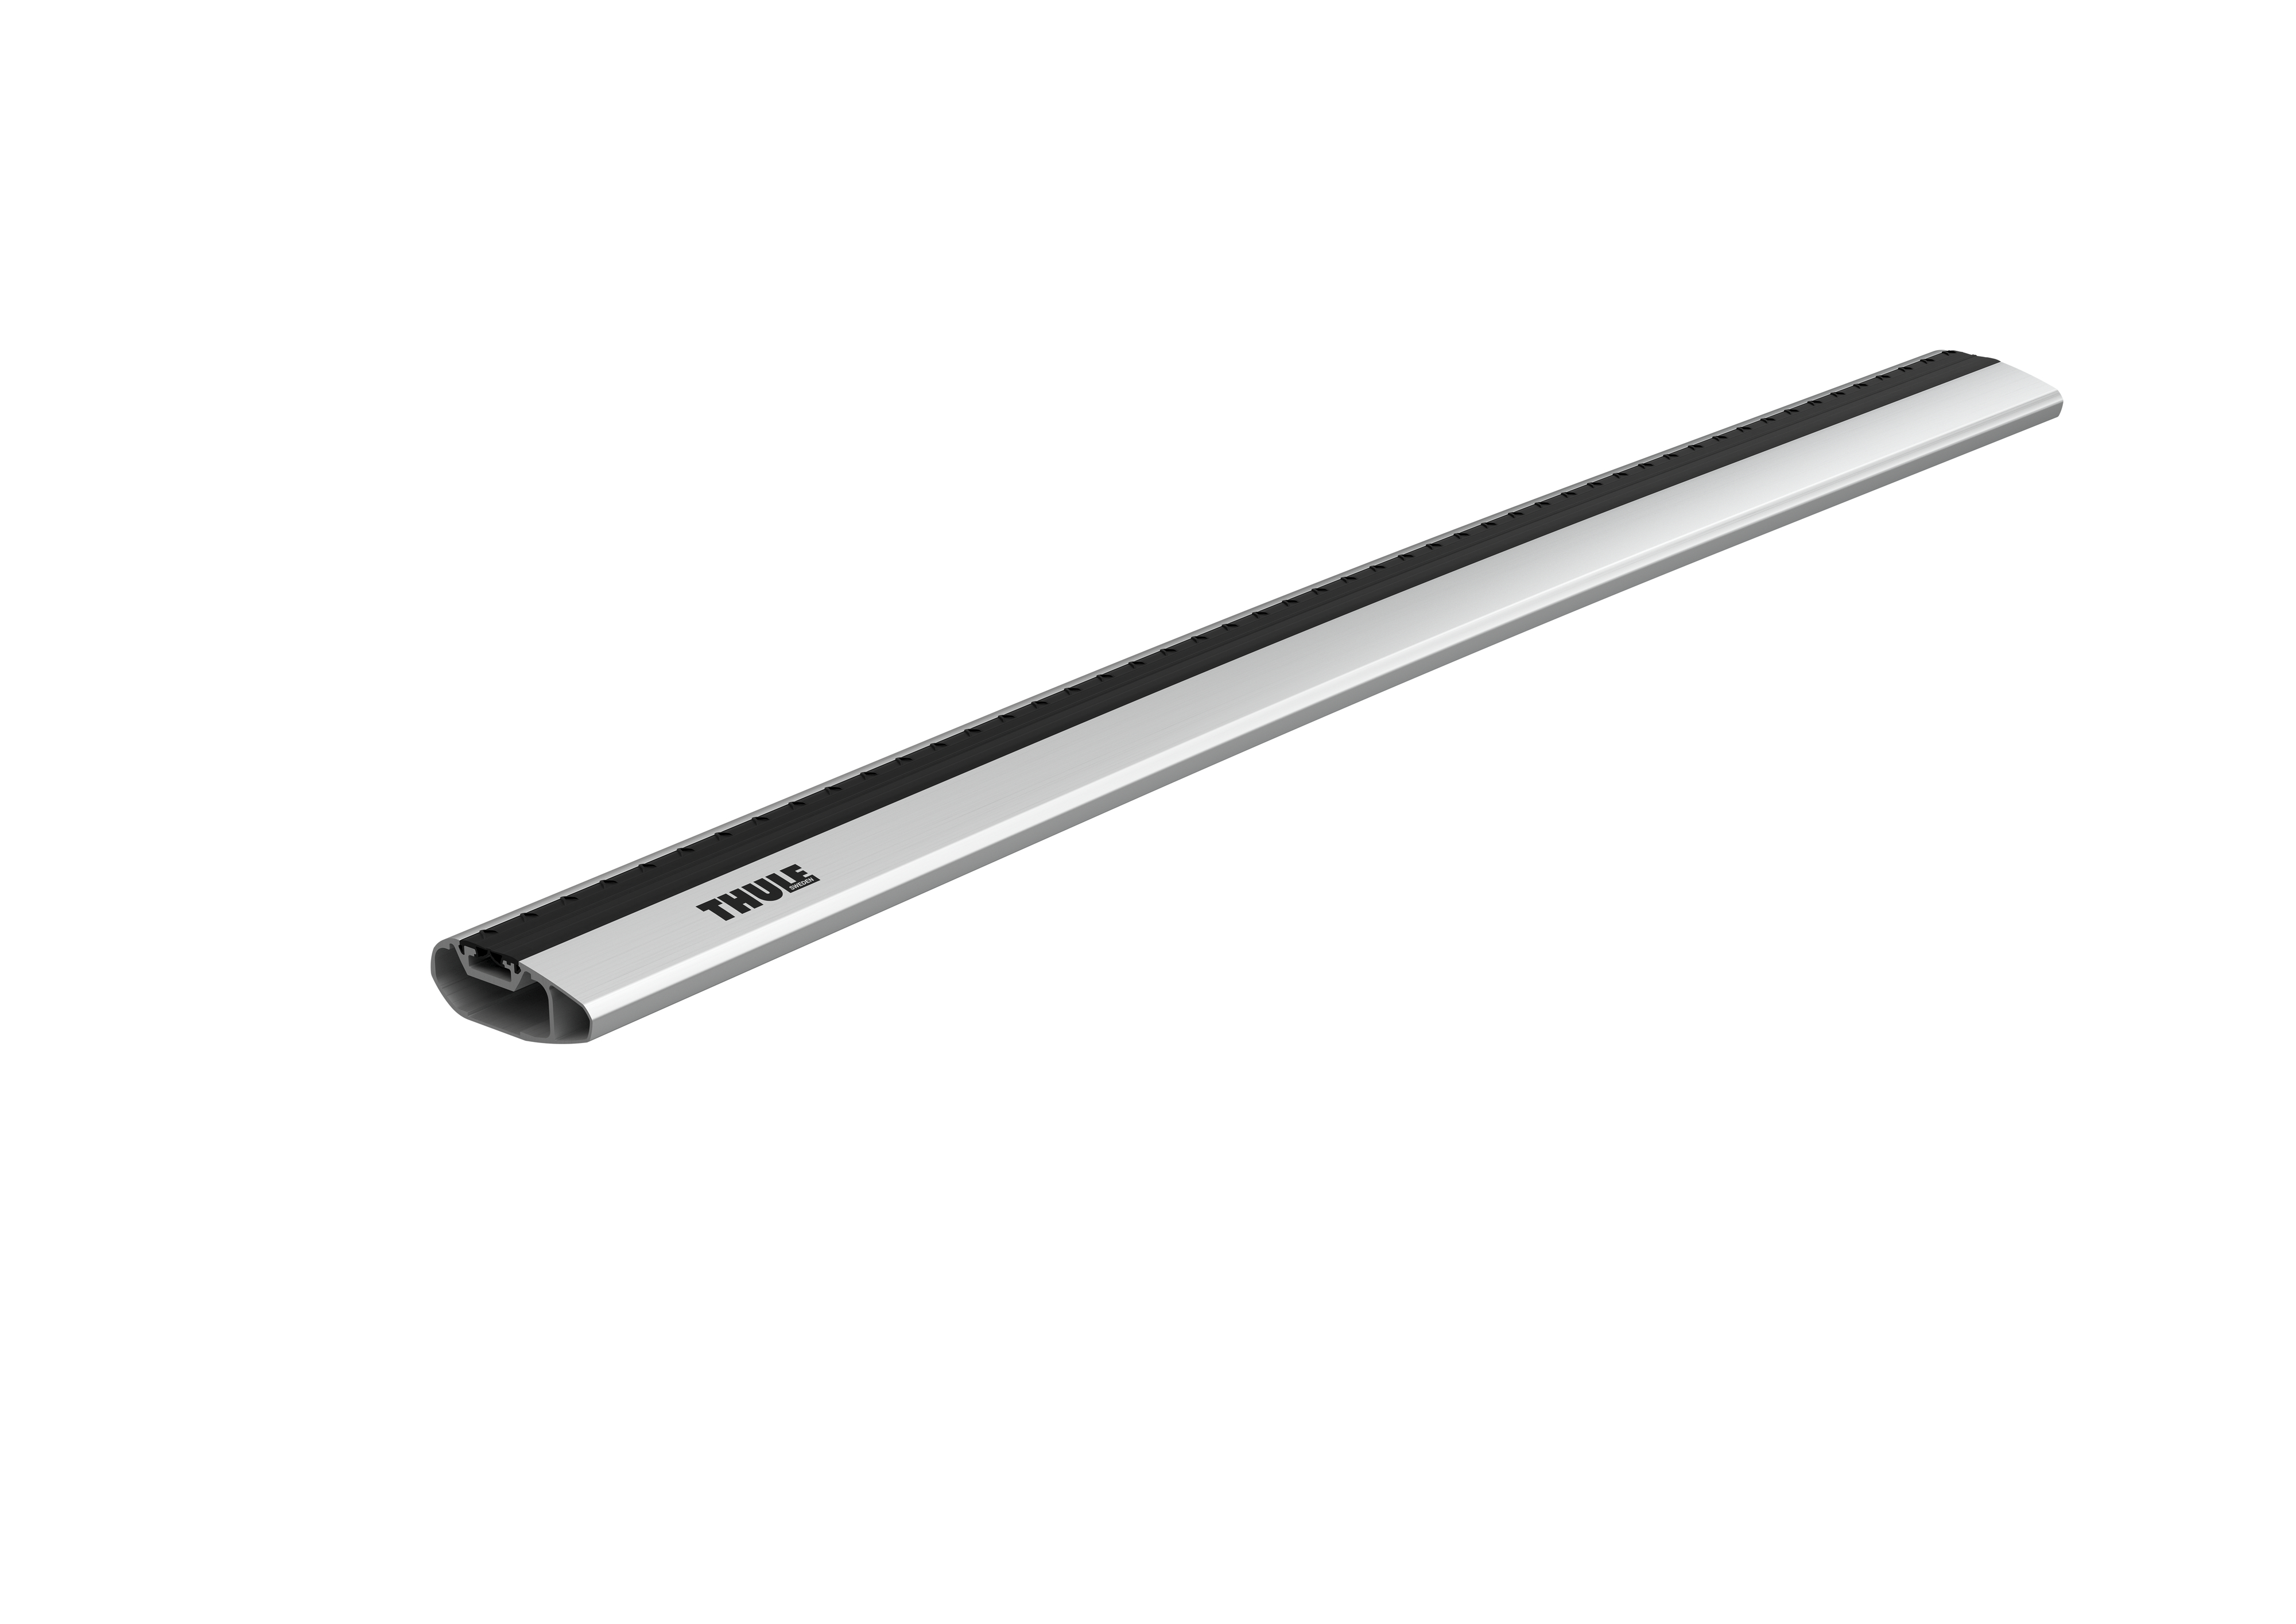 What is the overall size of this bar? Length, width